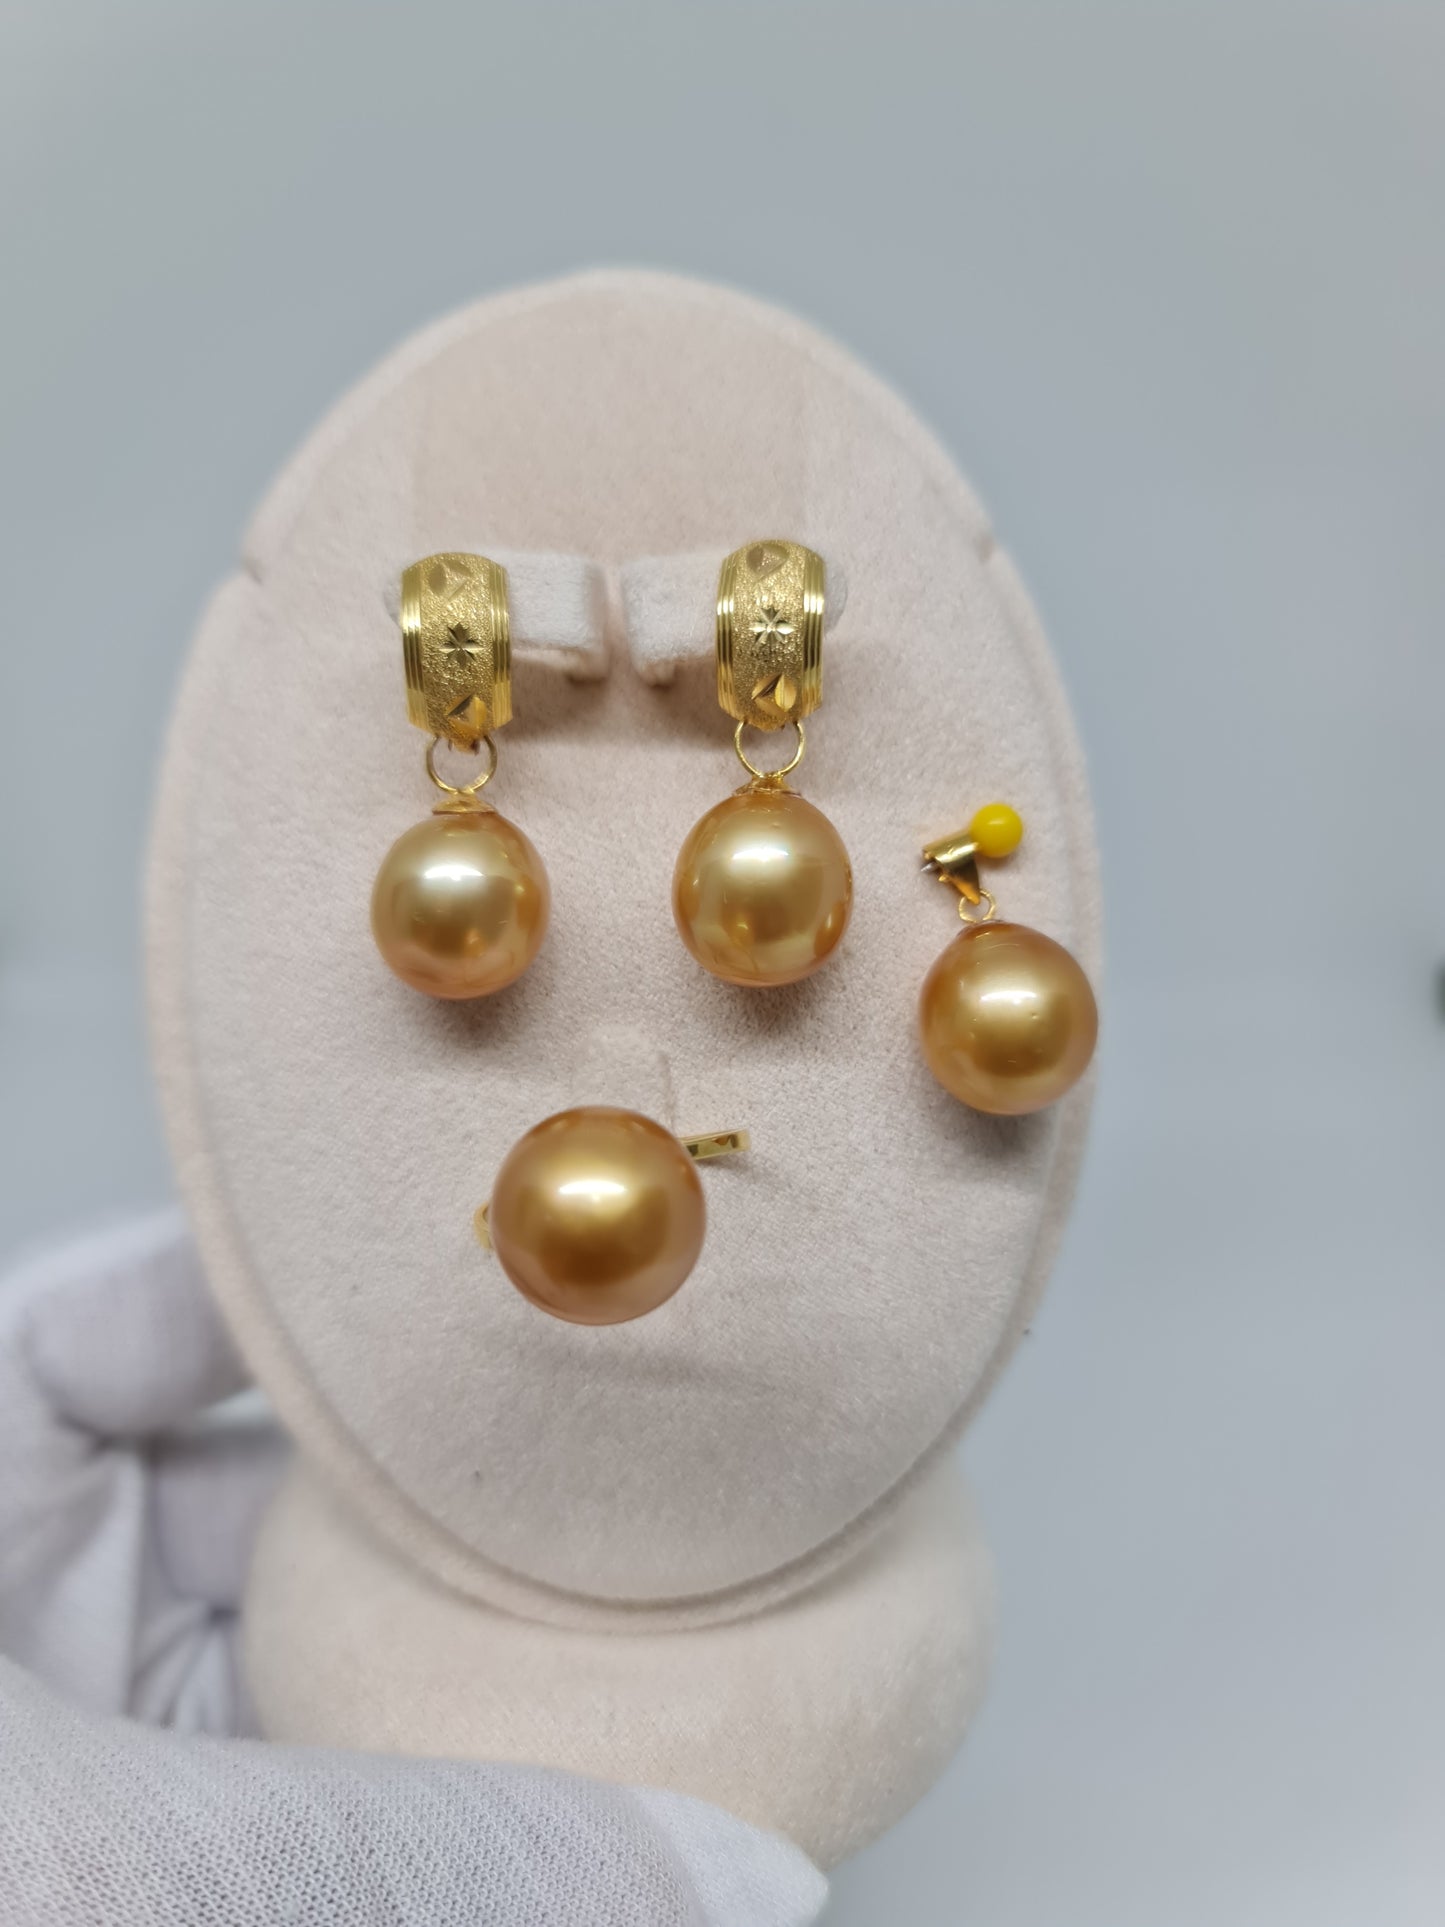 13.5mm Deep Golden South Sea Pearls Set in 18K and 14K Gold